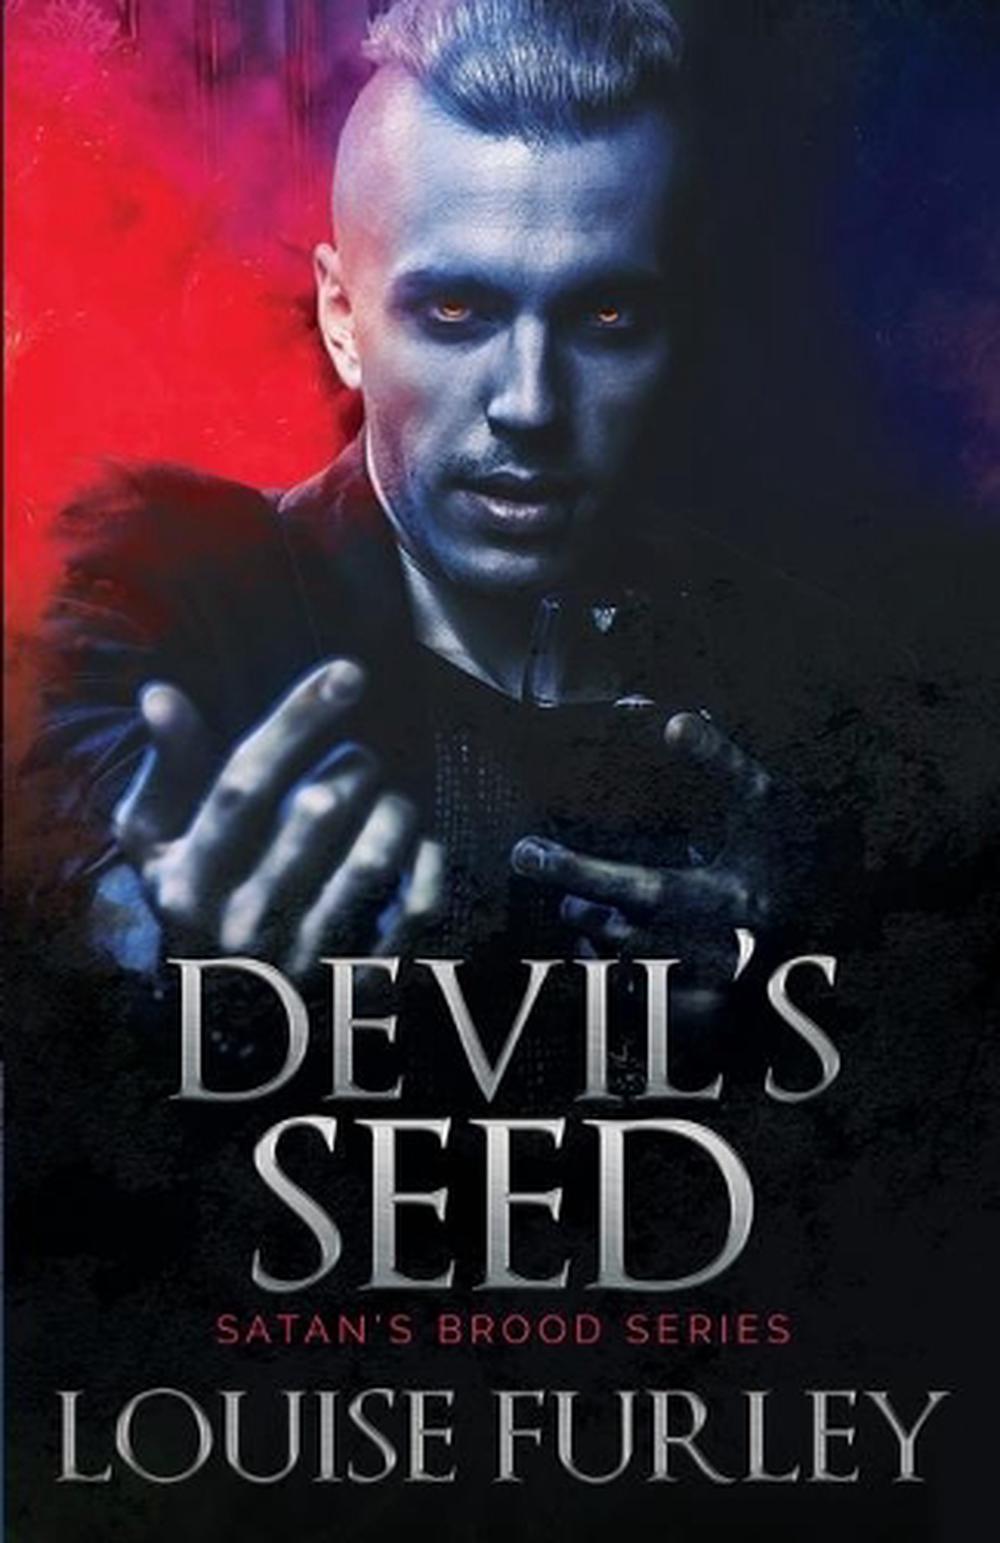 Devils Seed Satans Brood By Louise Furley English Paperback Book